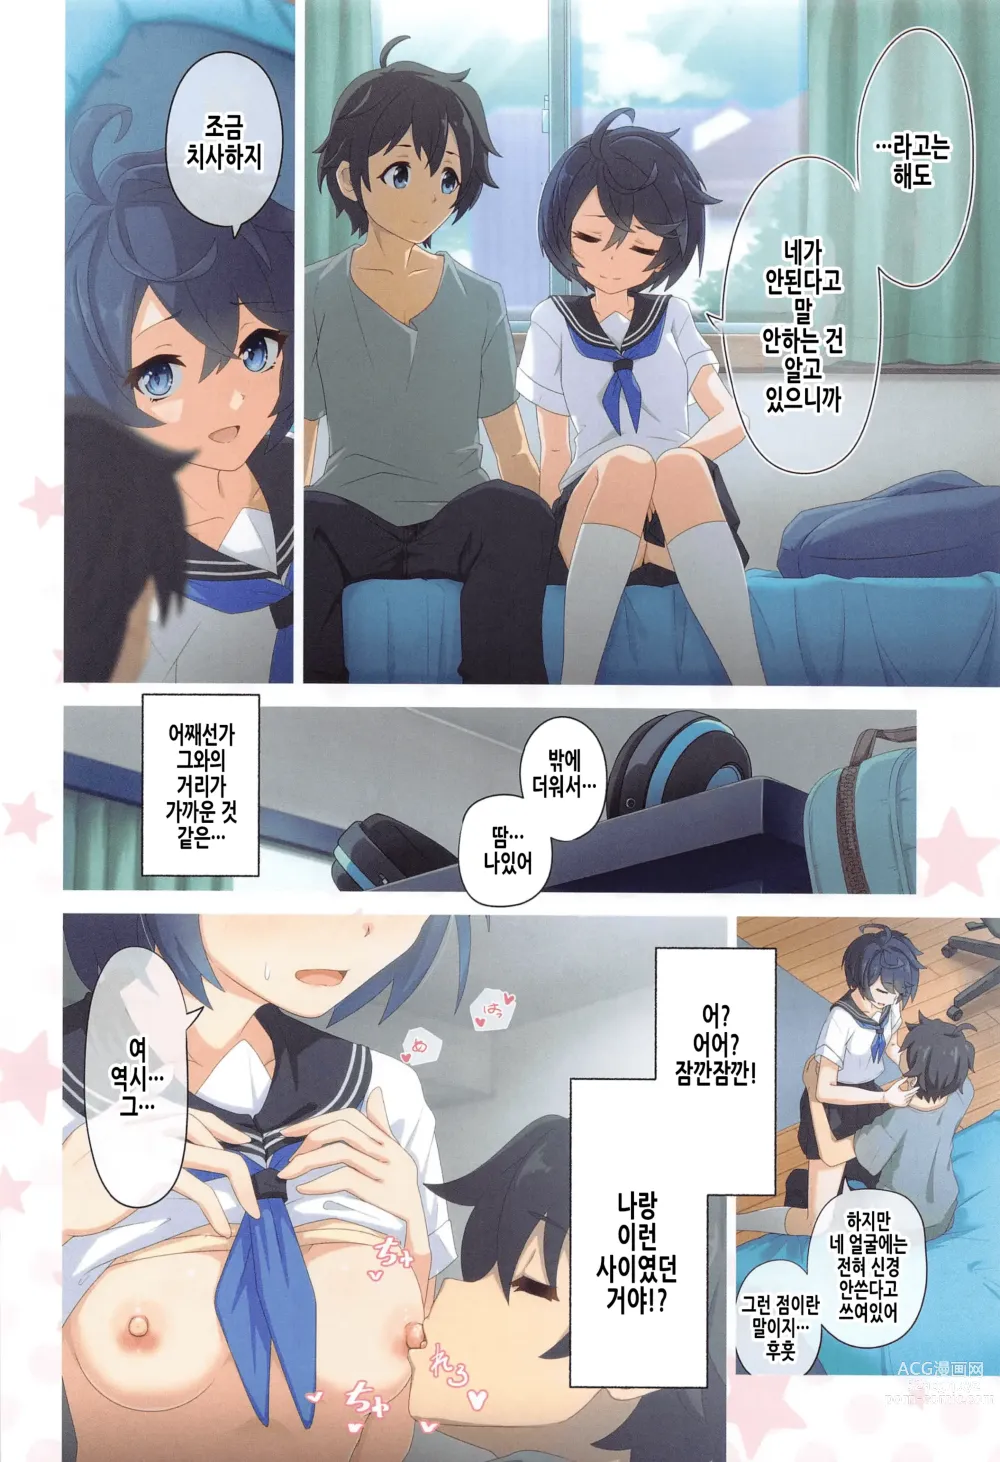 Page 6 of doujinshi 컬러풀 커넥트 8th:Dive